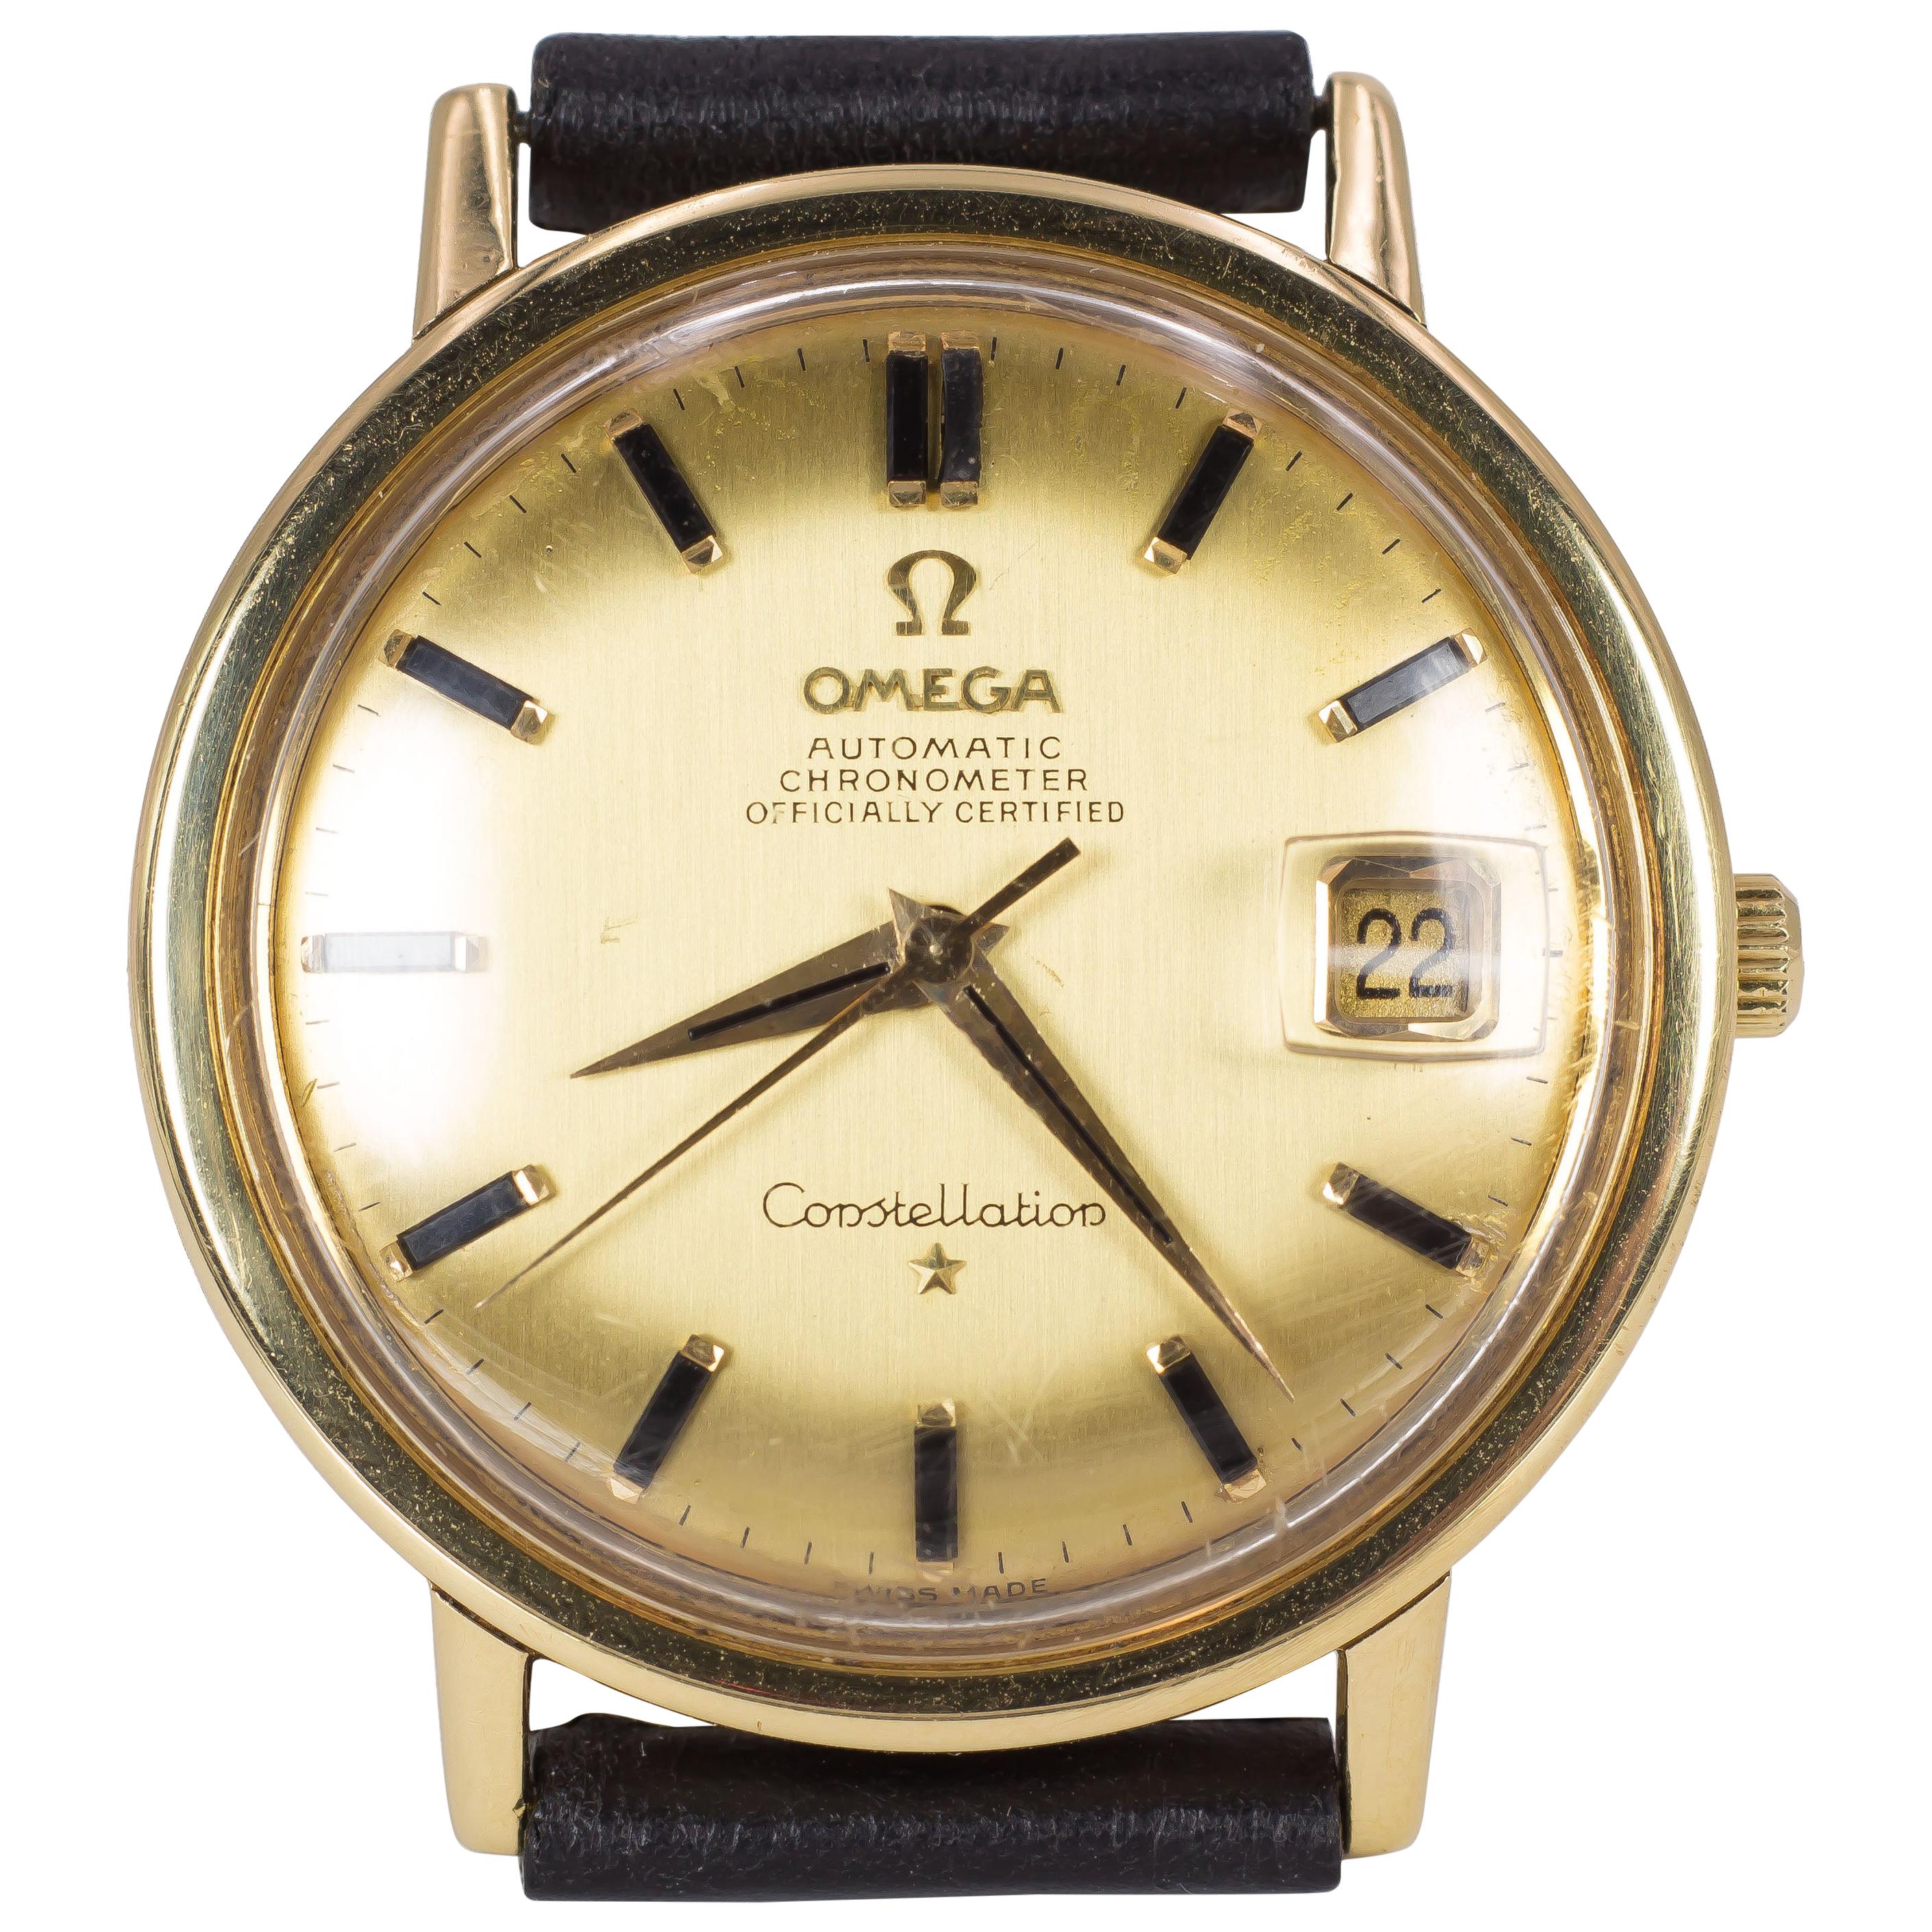 18 Karat Gold Omega Constellation Chronometer Automatic Wrist Watch, 1960s For Sale